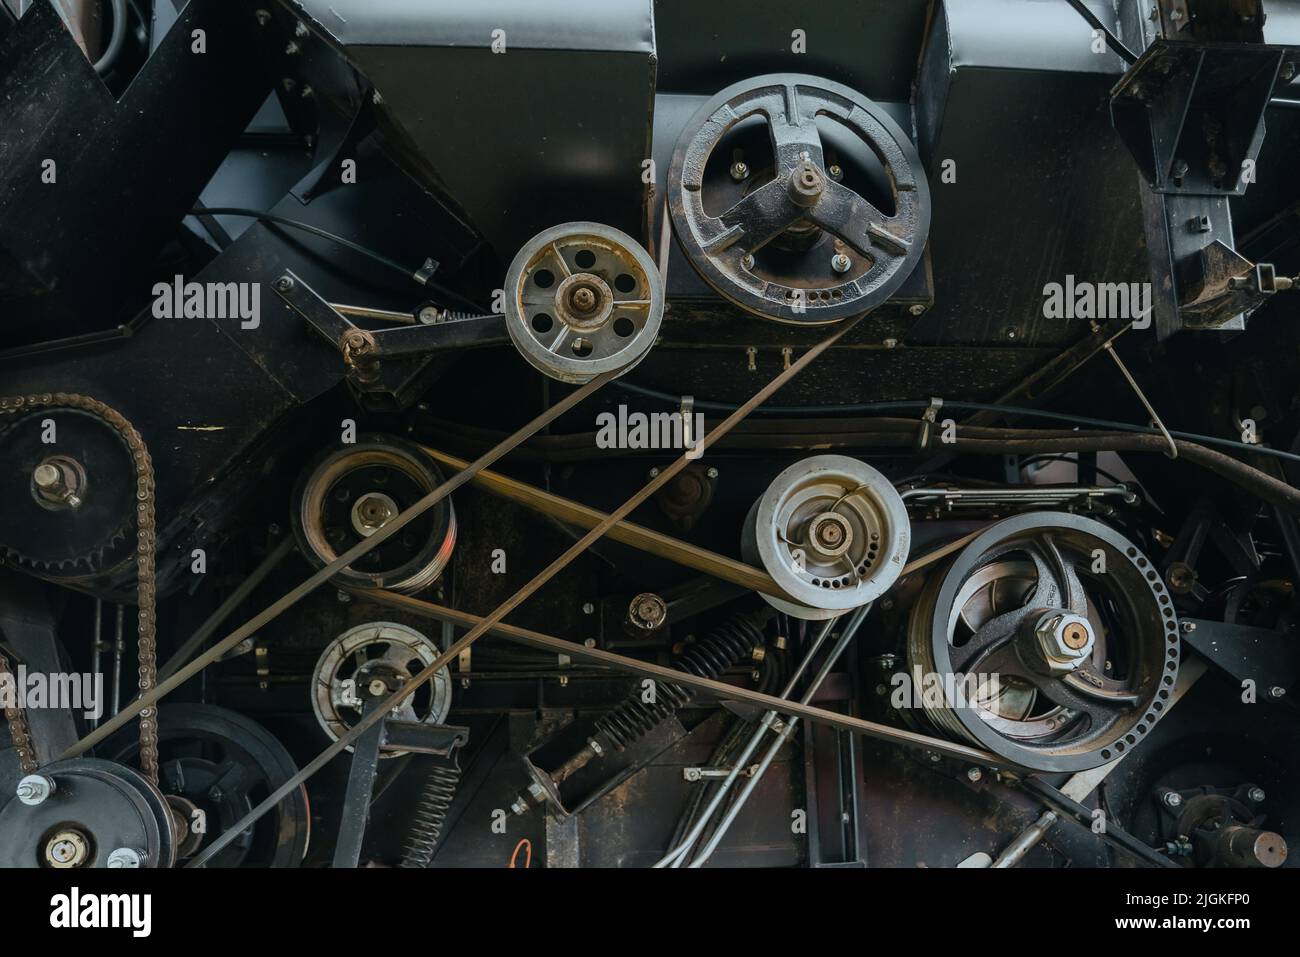 A view of the belt drive engine. Big powerful industrial combine harvester machine. Engine details. Diesel engine. Motor. Heart of the tractor. Oil machinery technology Stock Photo